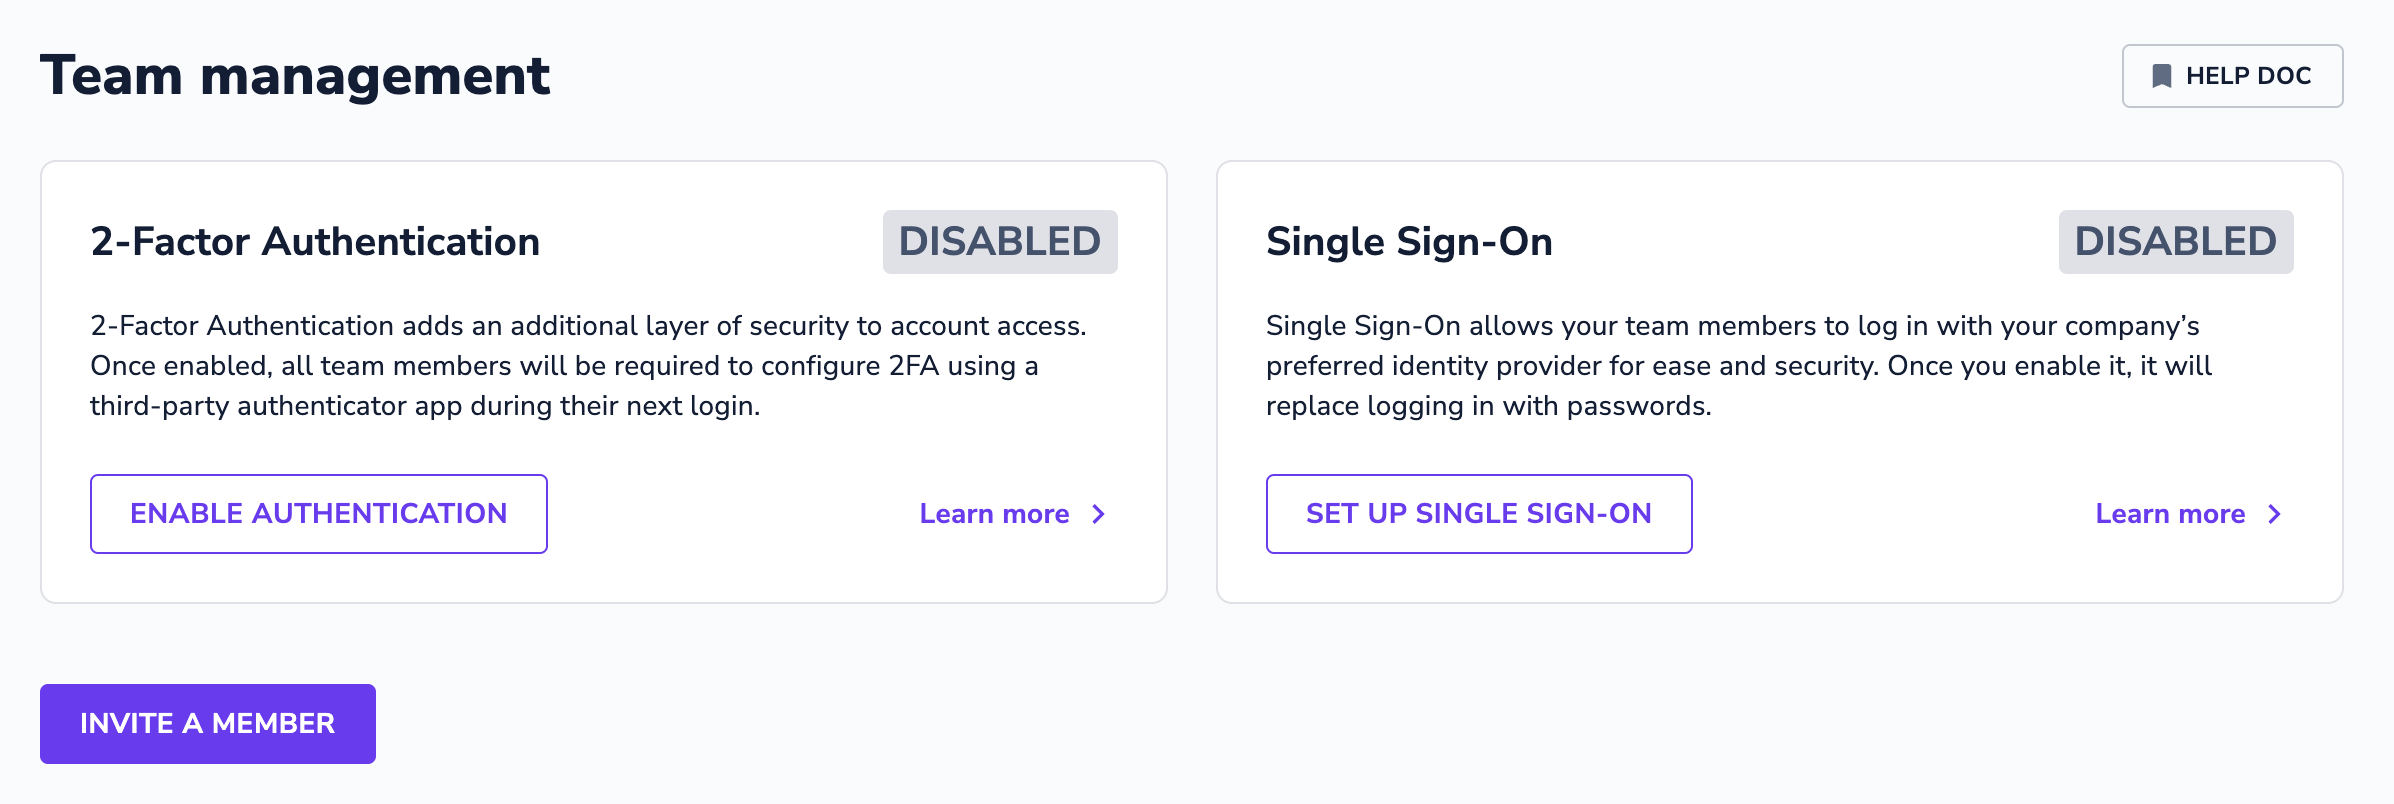 Team management section to activate 2FA and Single Sign-on